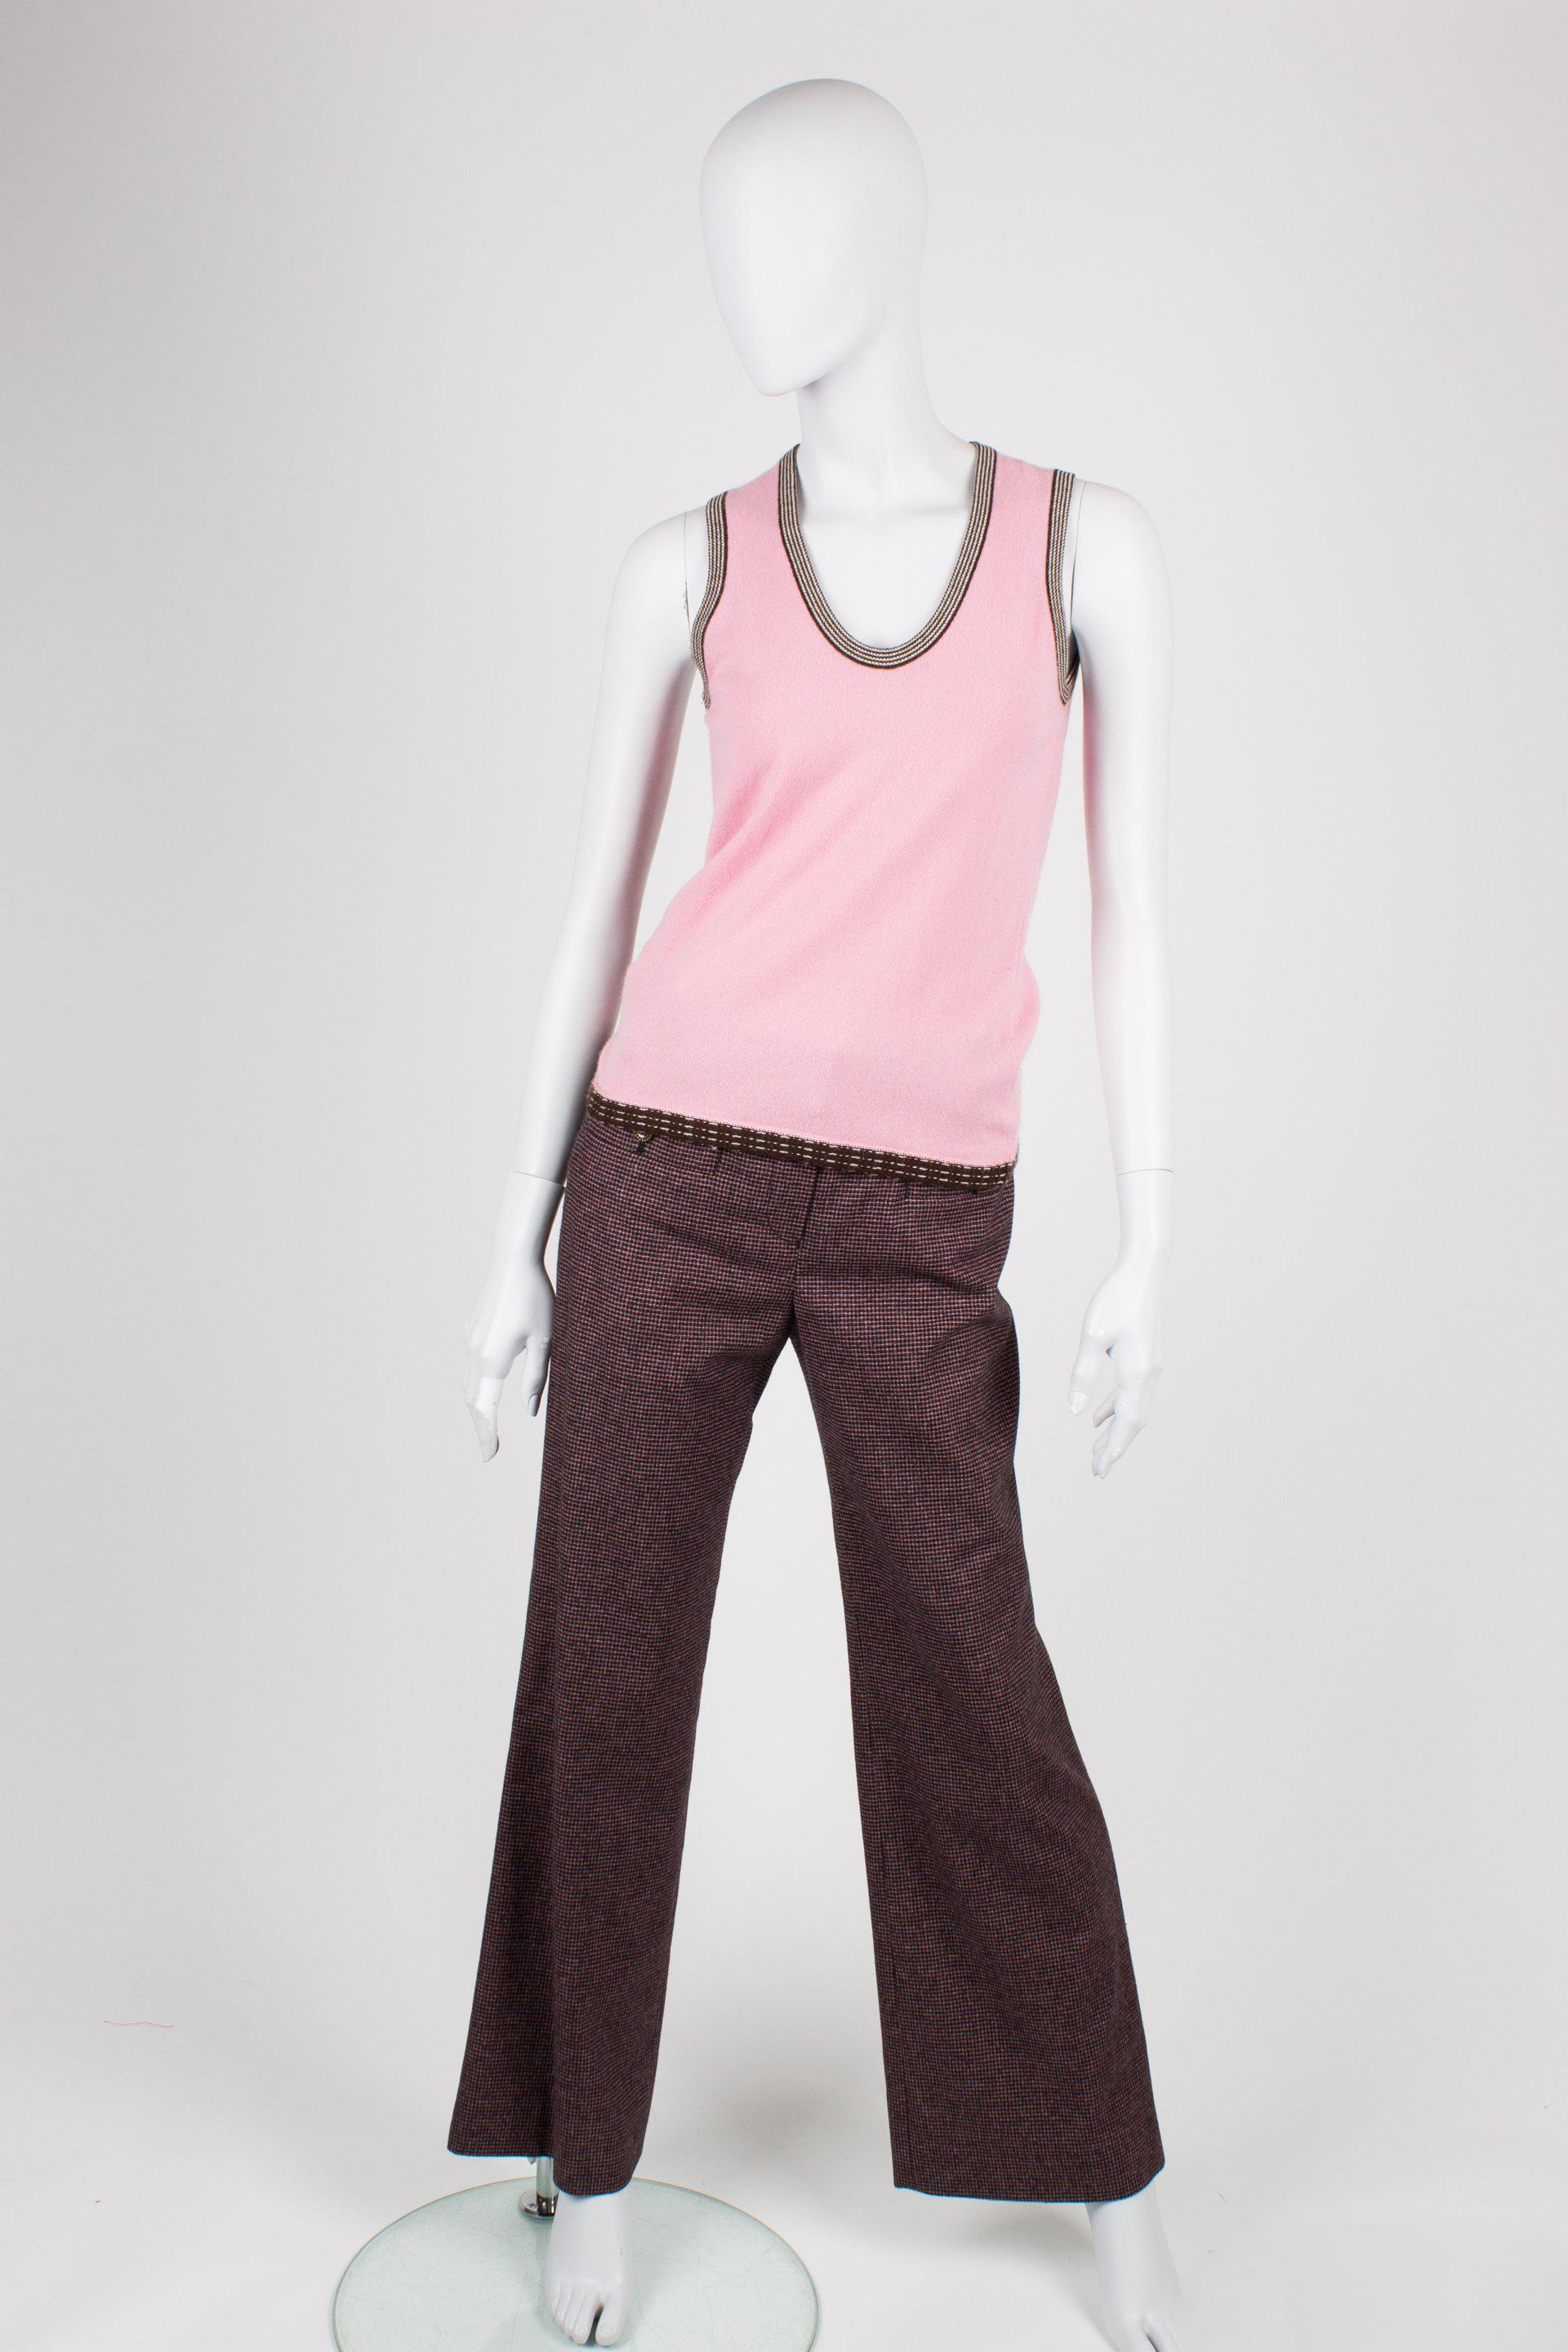 Chanel Cardigan/Top/Pants 3-pcs Suit - brown/pink In New Condition For Sale In Baarn, NL